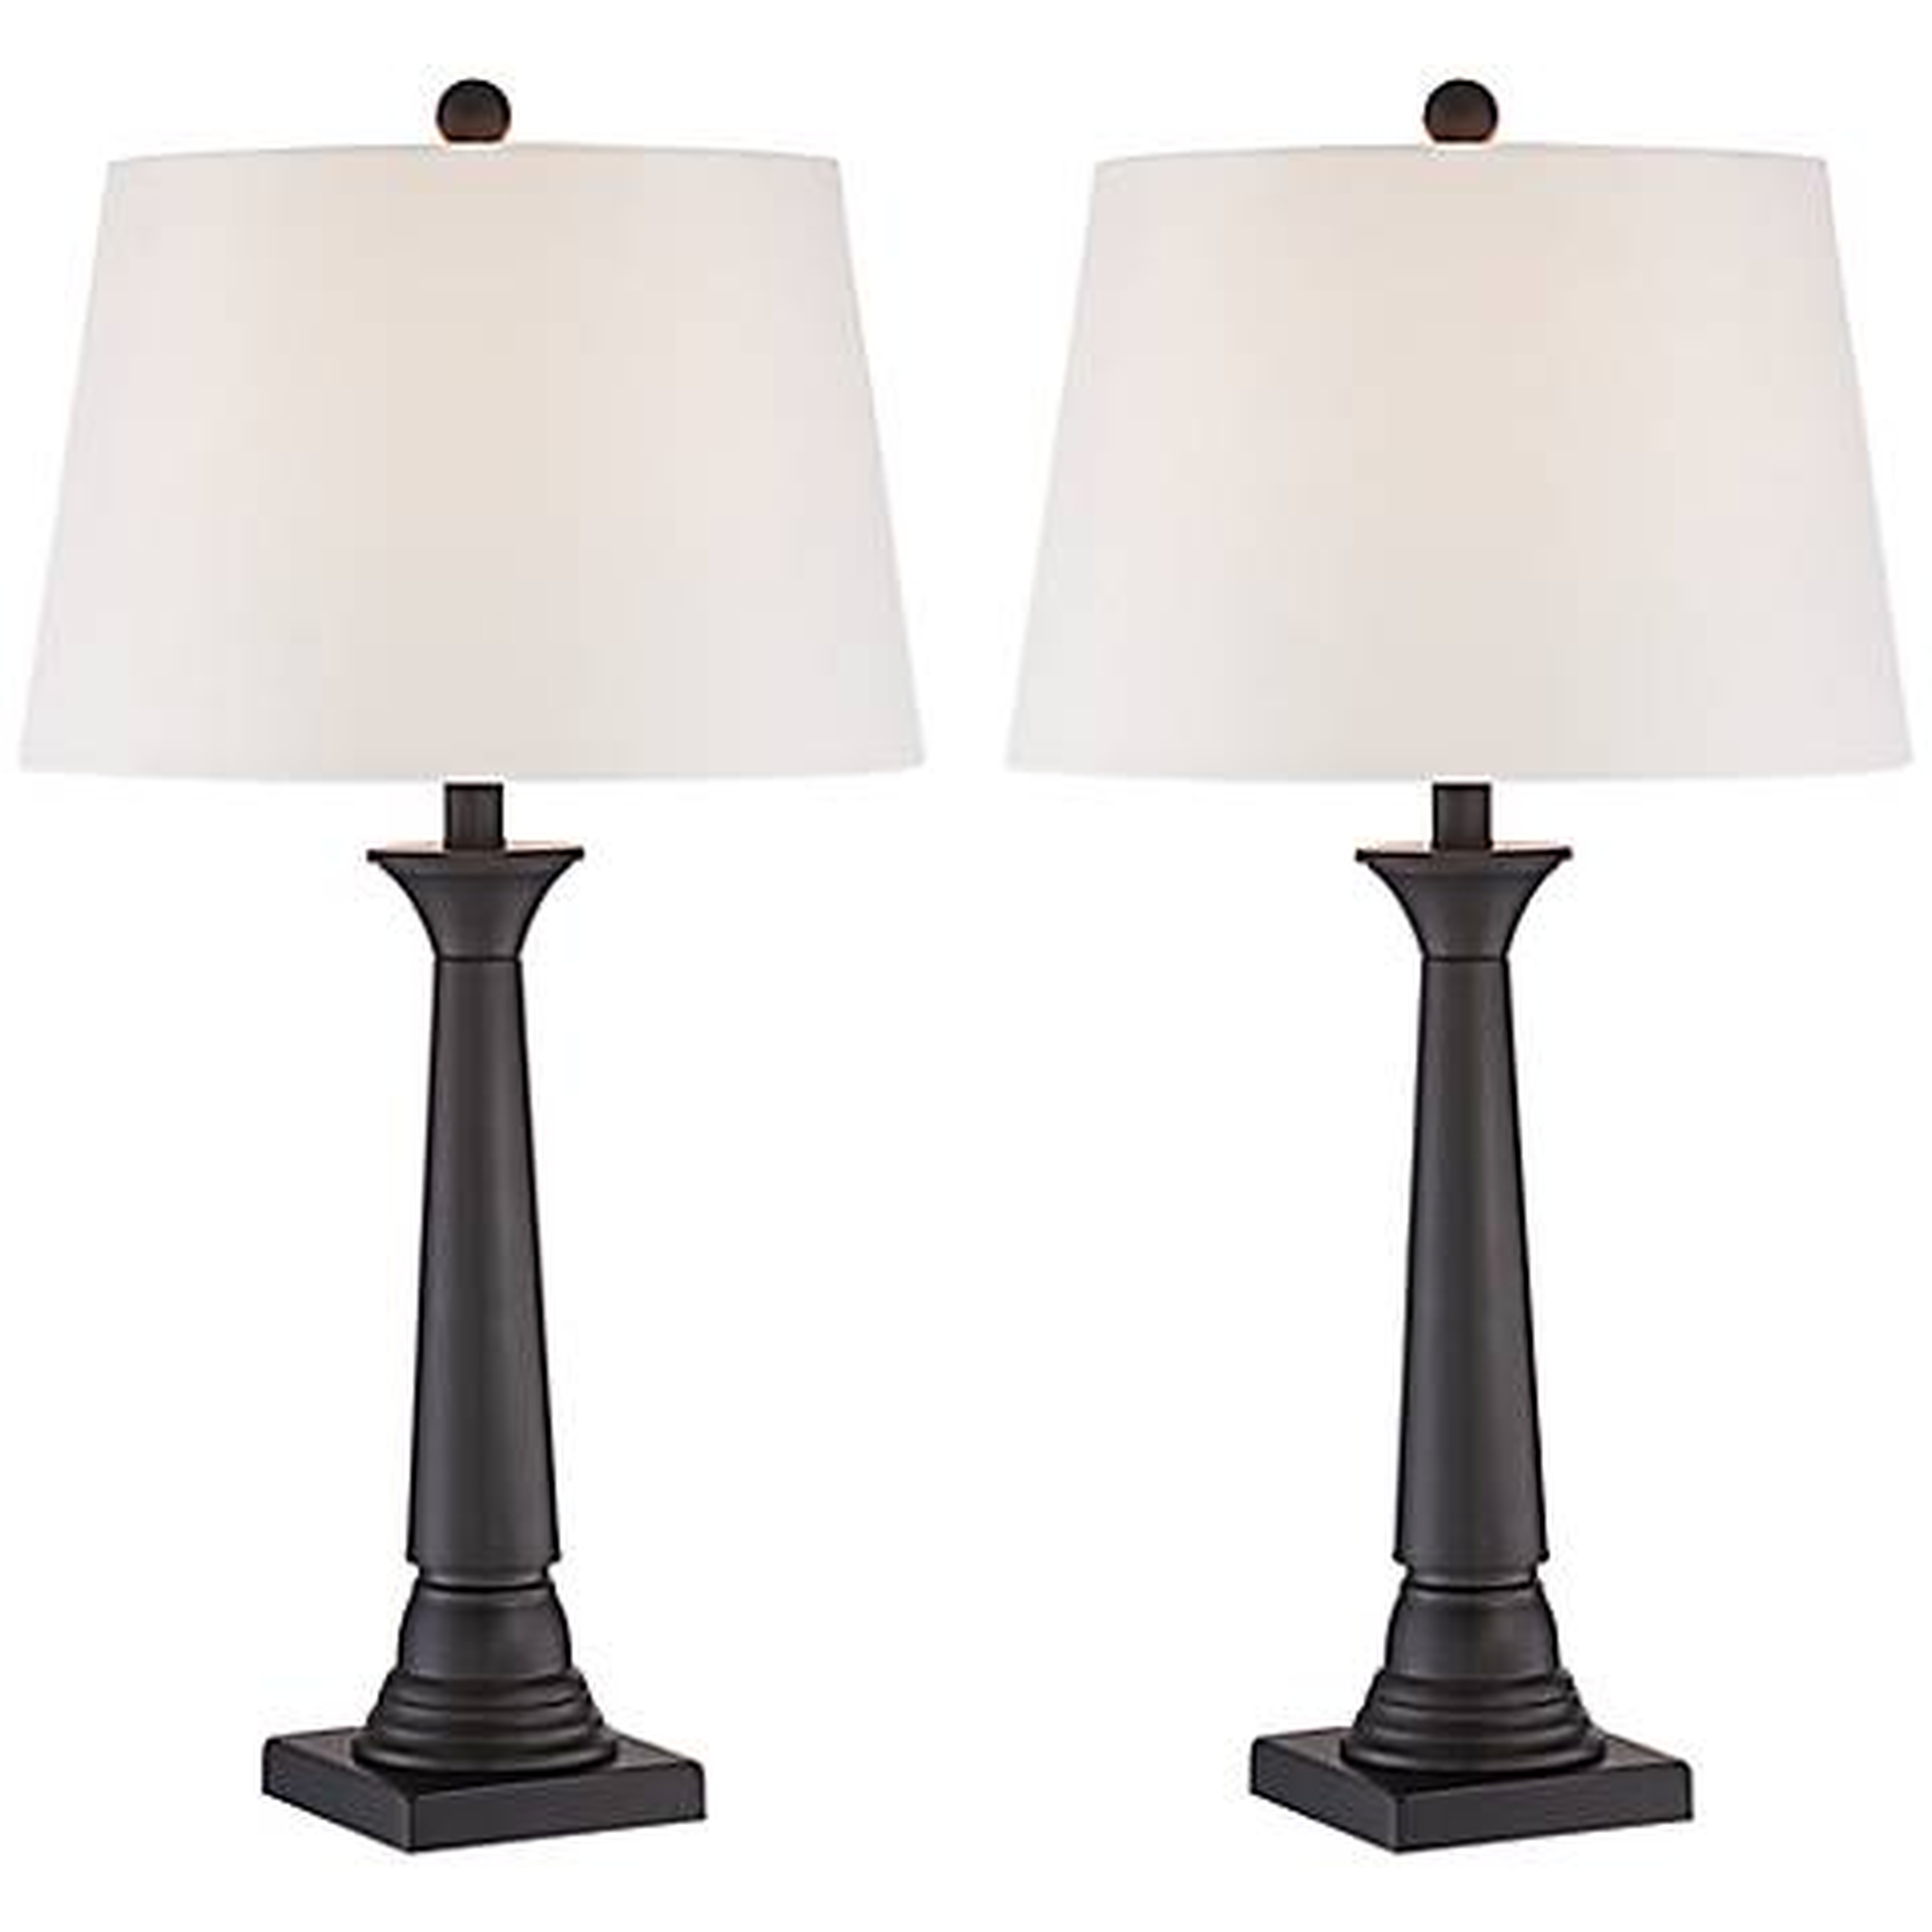 Dolbey Bronze Tapered Column Table Lamp Set of 2 - Lamps Plus